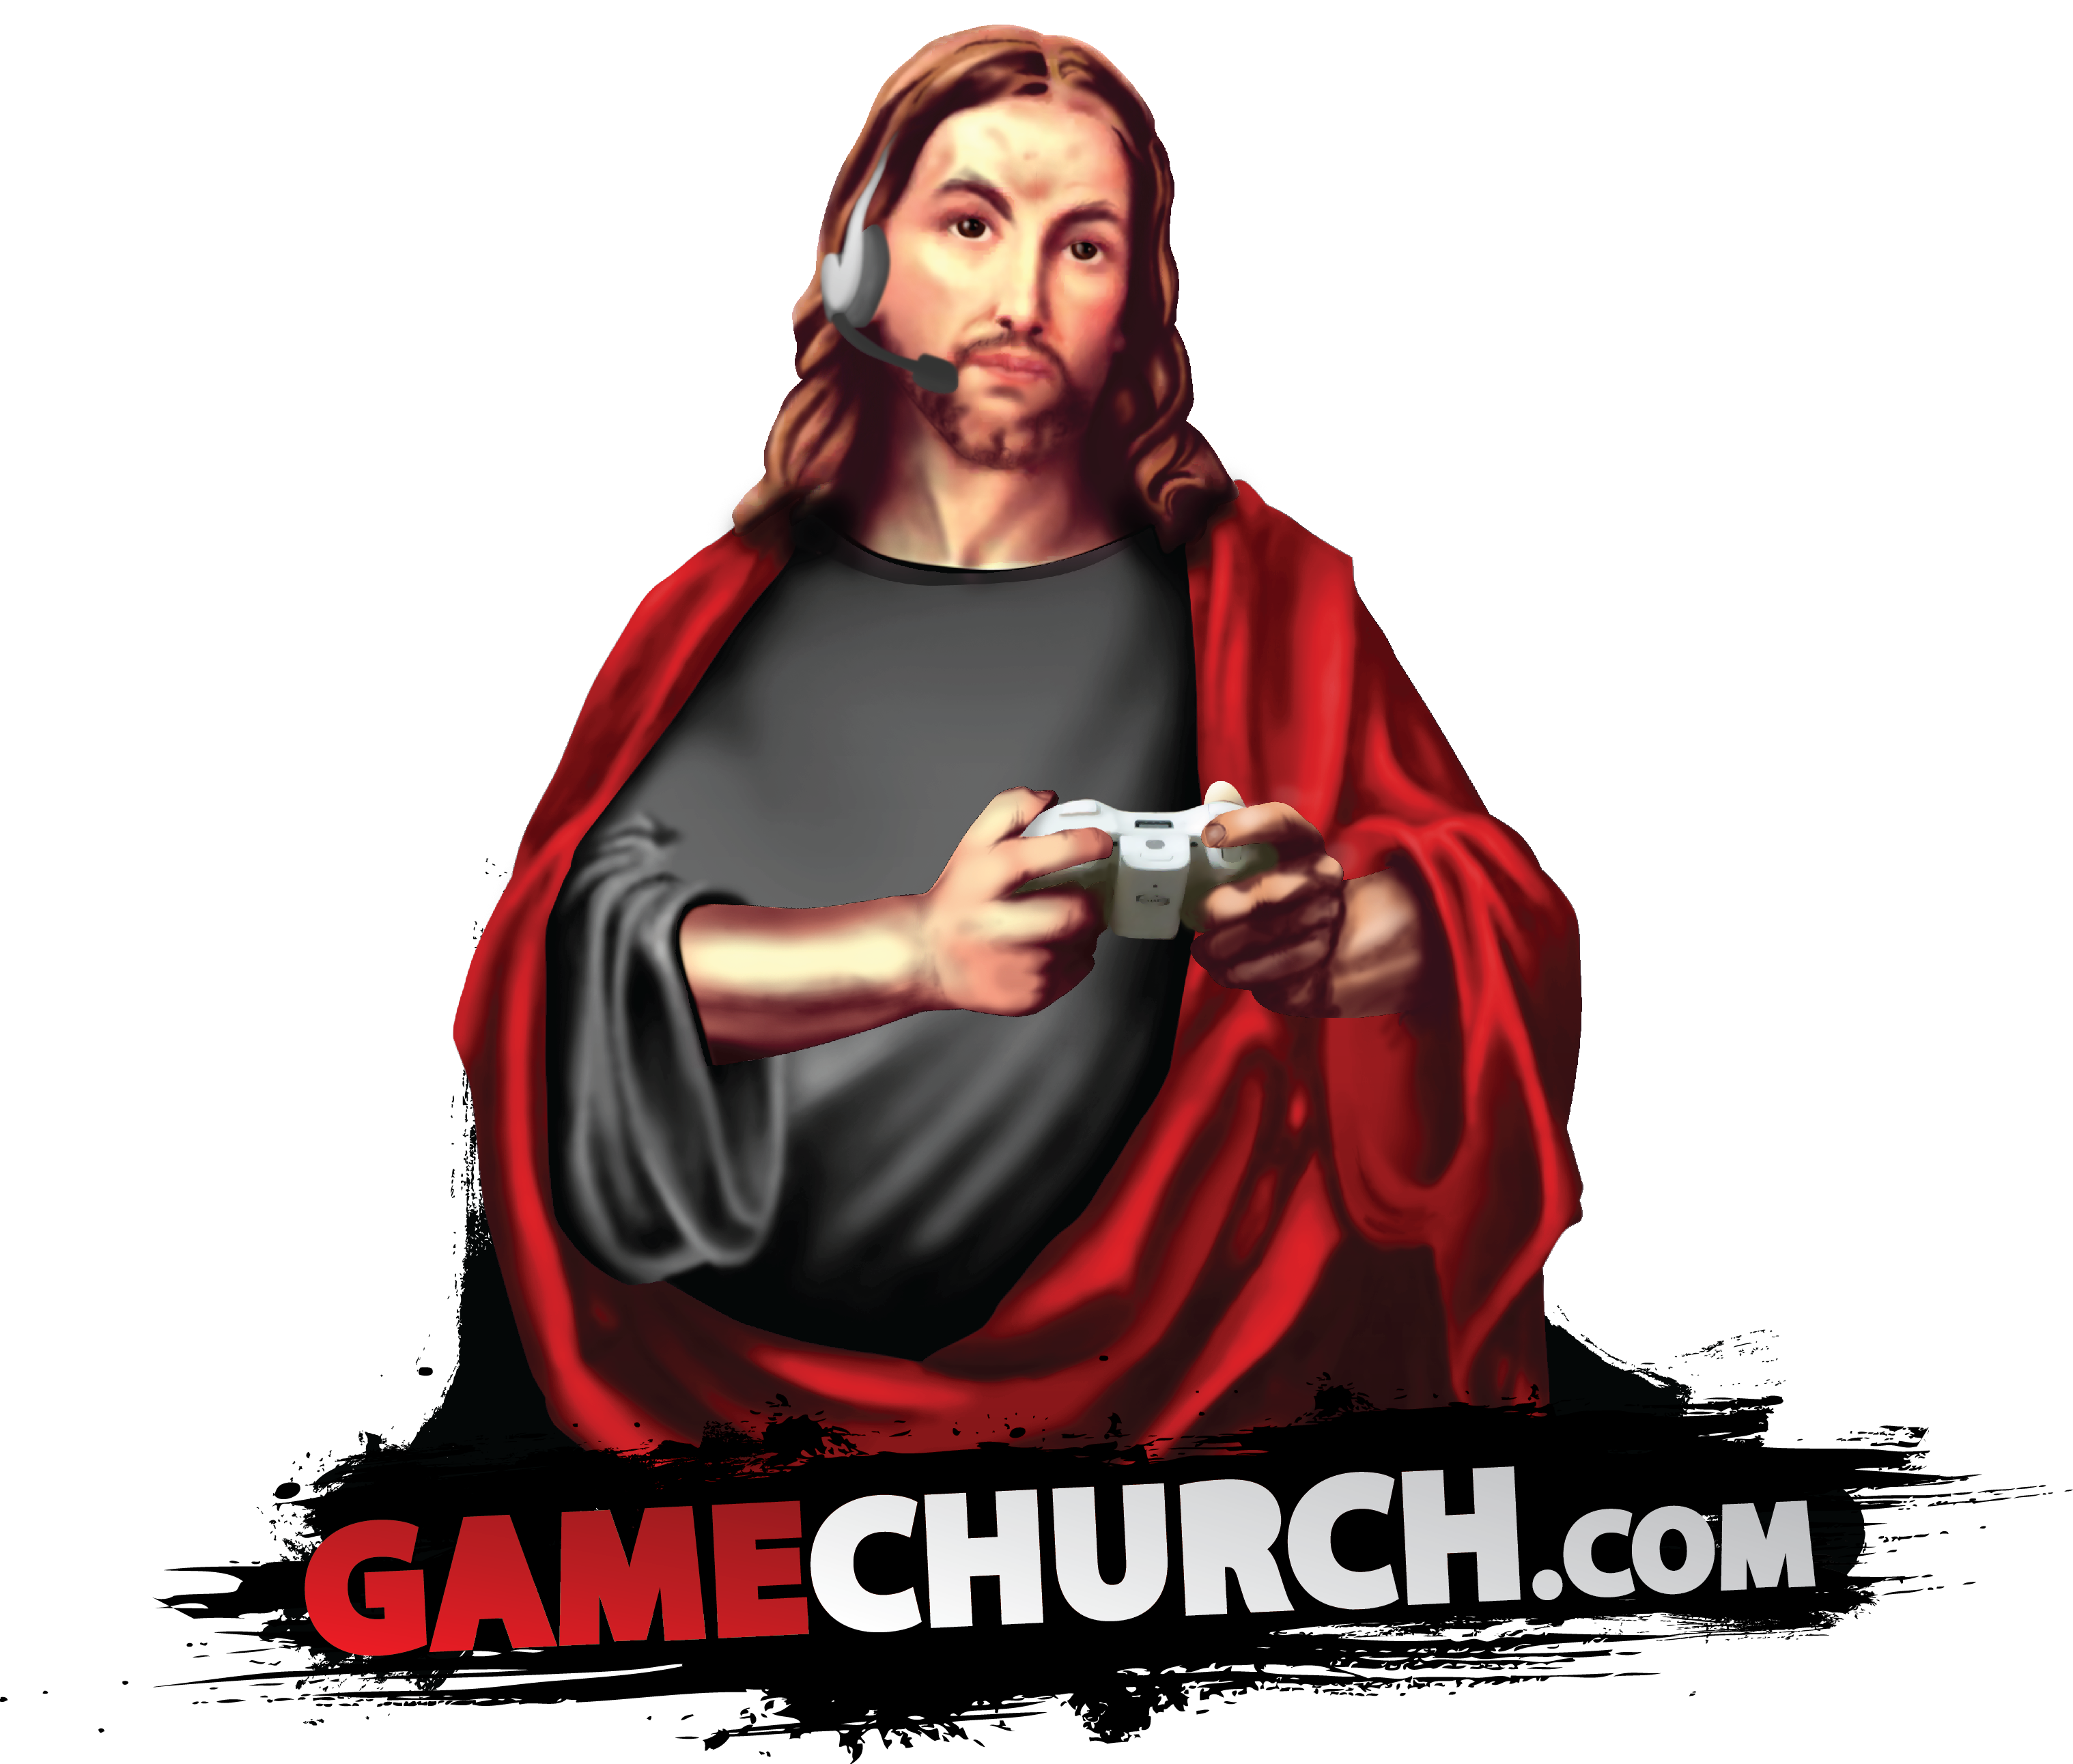 GameChurch’s Mike Bridges Talks Gaming and Jesus For the Win